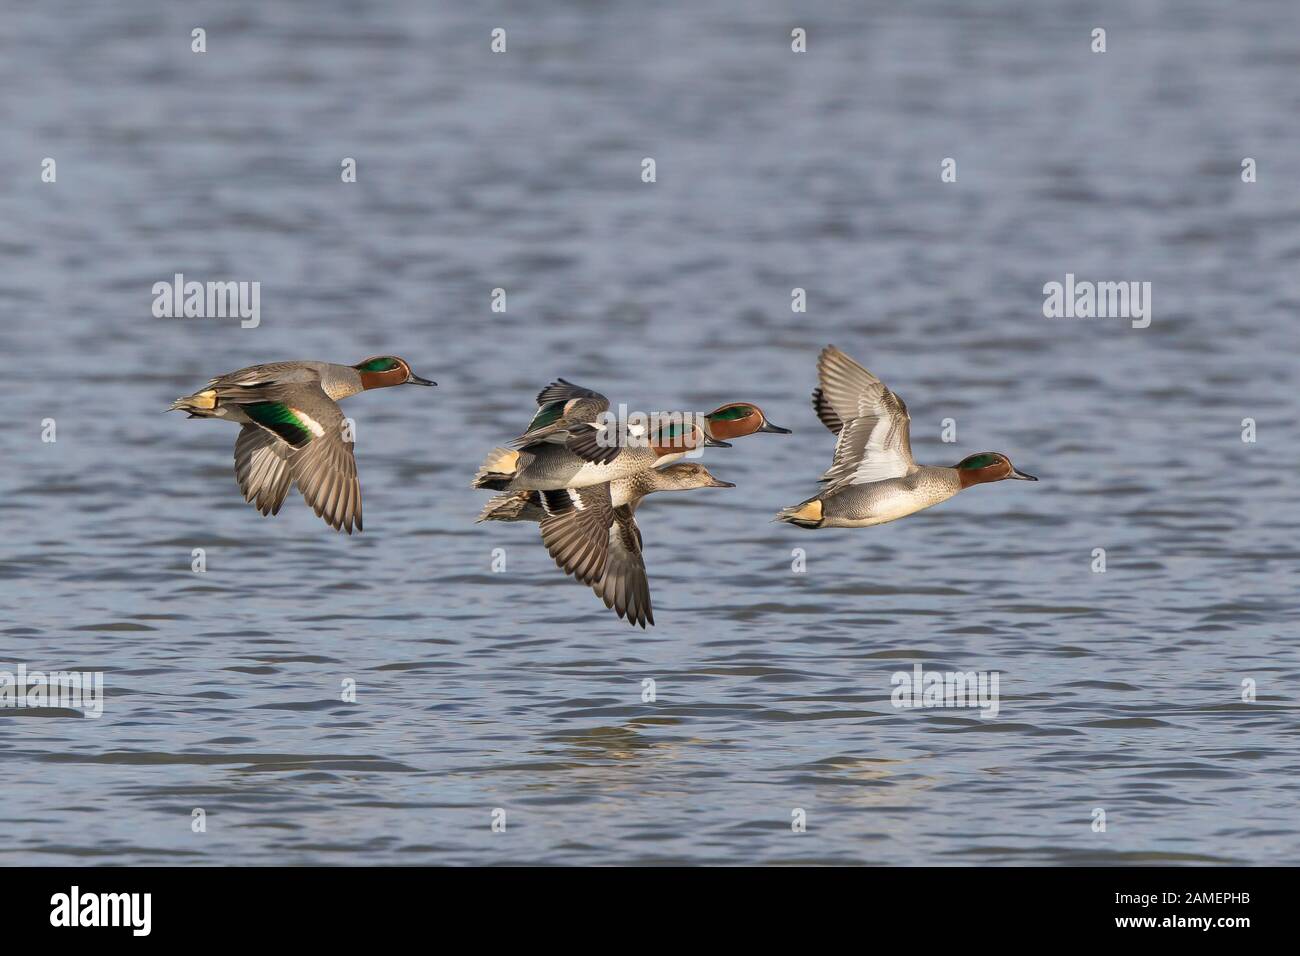 Flock of wild UK teal ducks (Anas crecca) in midair flight over water, flying free, facing right in winter sunshine. Stock Photo